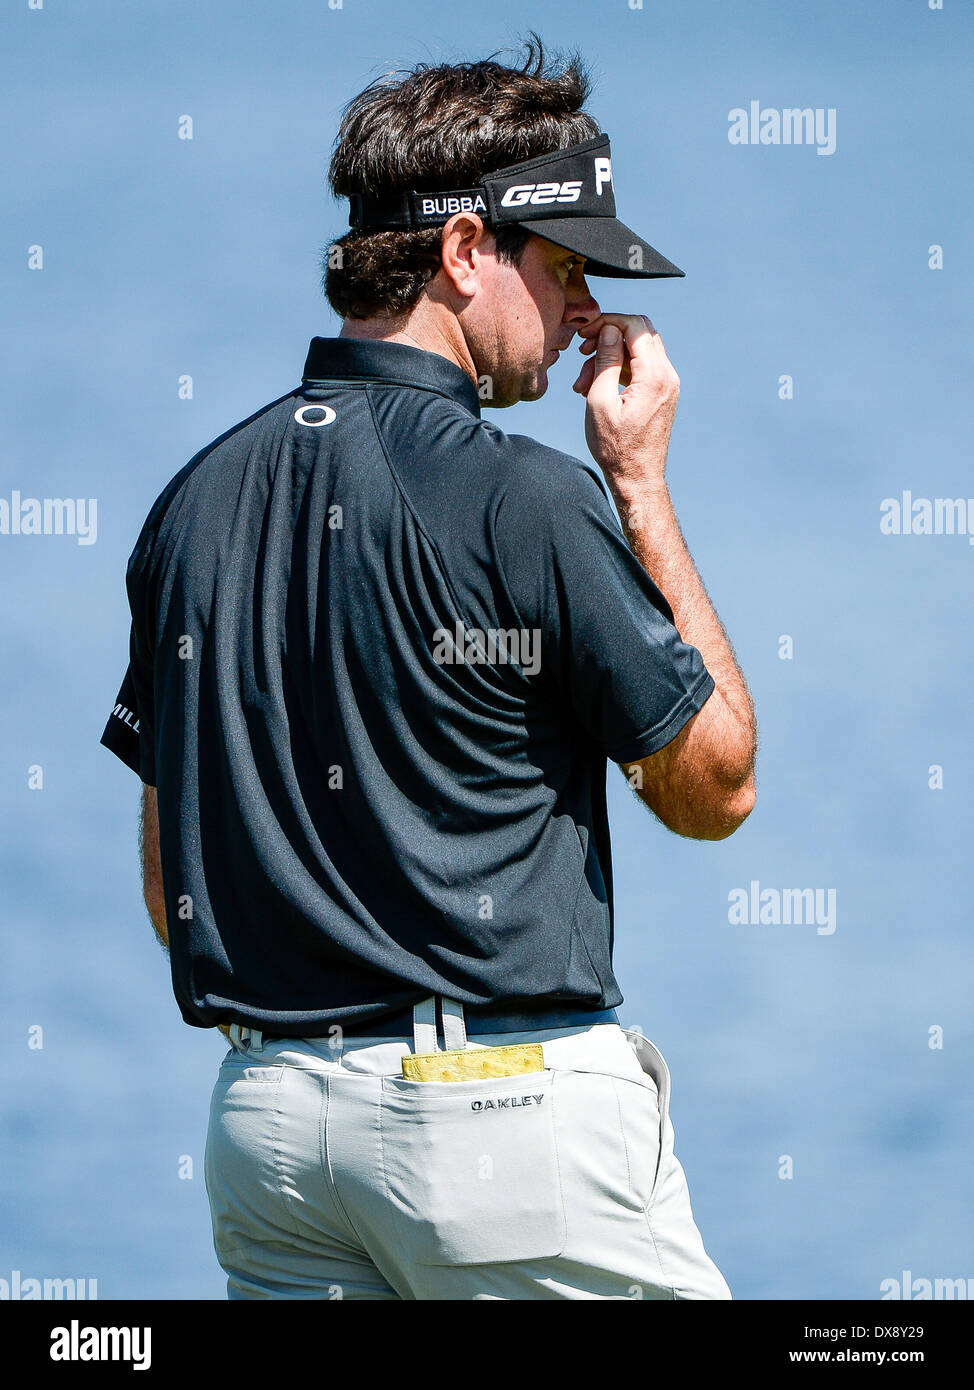 Orlando, Florida, USA. 20th March 2014. Bubba Watson reacts after scoring an 11 on the par 5 6th green after hitting 2 tee shots into the water during first round golf action of the Arnold Palmer Invitational presented by Mastercard held at Arnold Palmer's Bay Hill Club & Lodge in Orlando, FL Credit:  Cal Sport Media/Alamy Live News Stock Photo